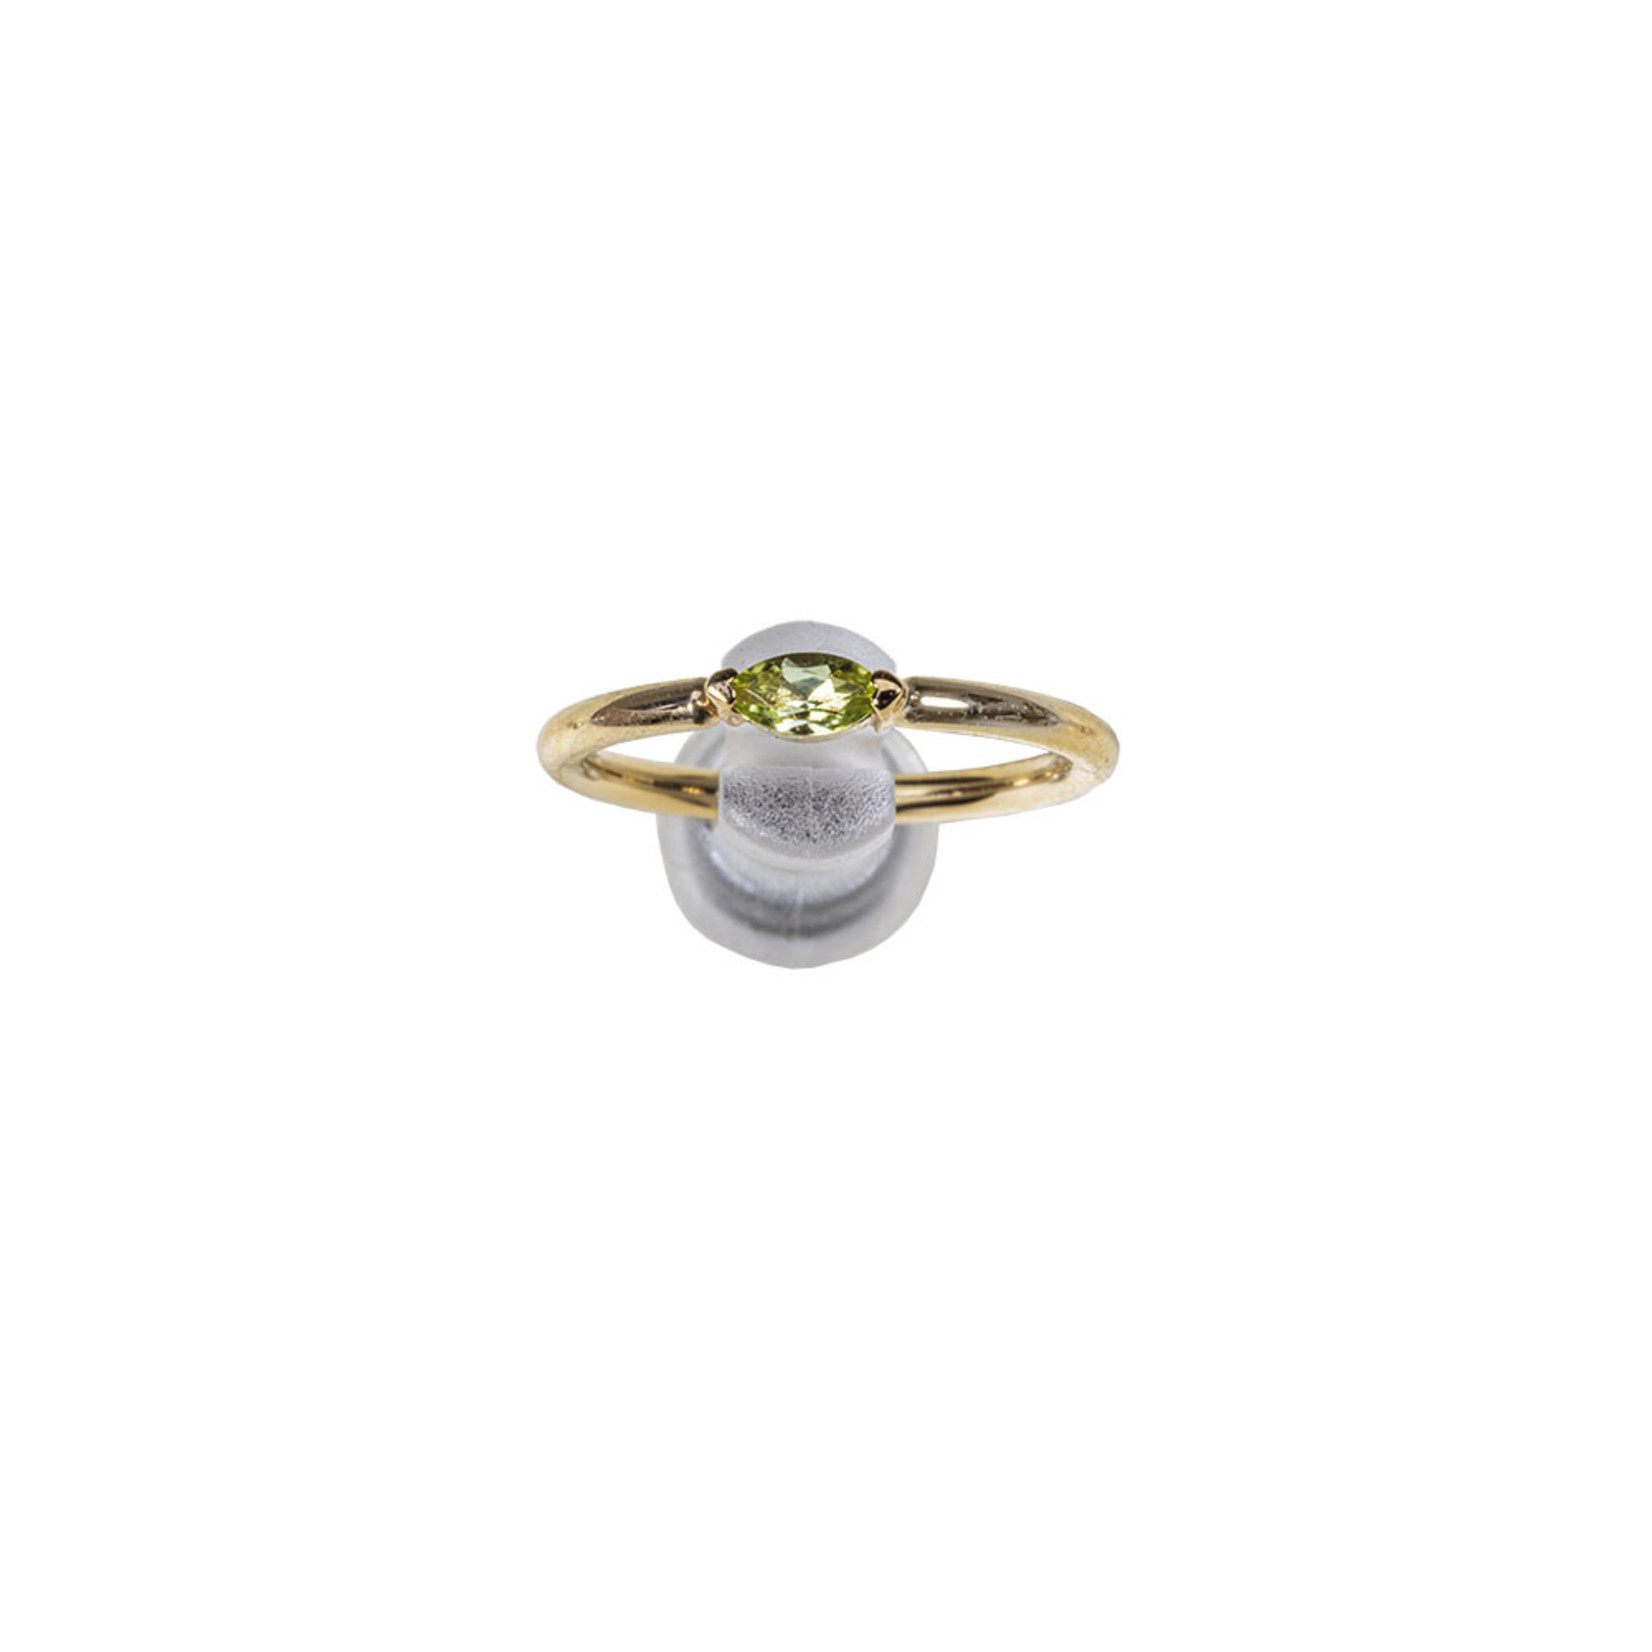 BVLA BVLA 18g fixed ring with 3x1.5 Marquise Peridot